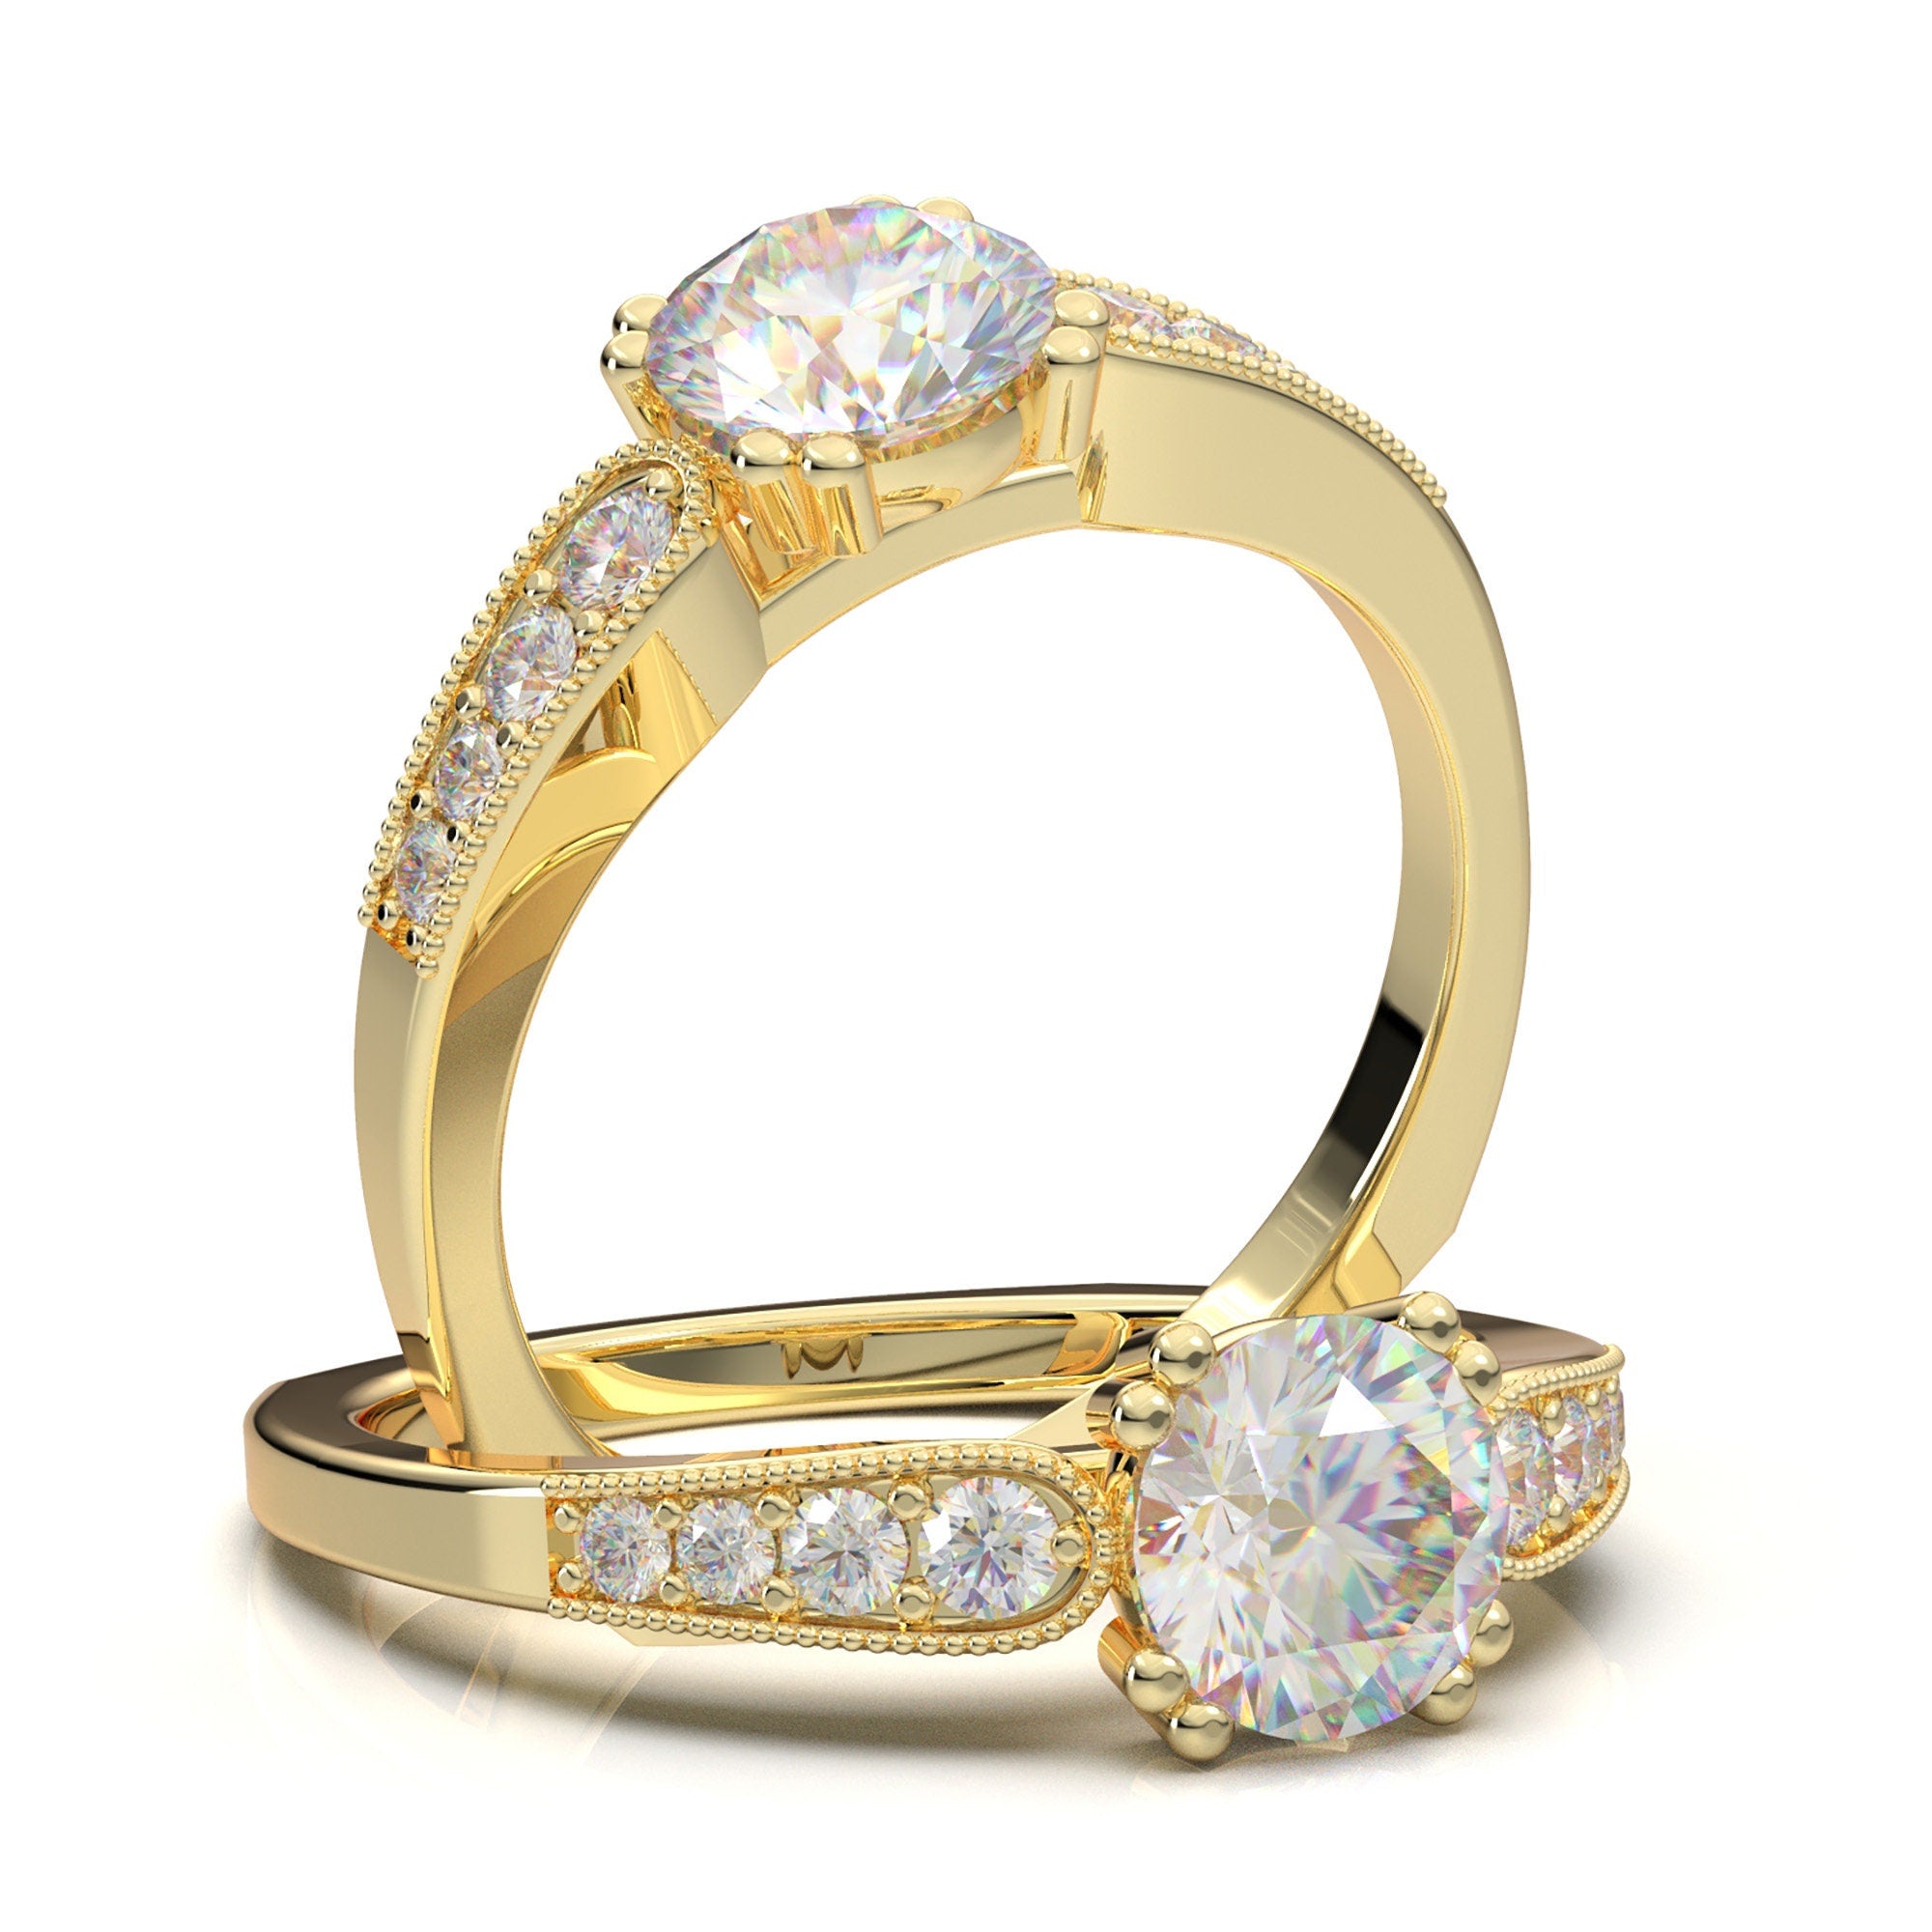 5 Reasons You'll Love a Low Profile Engagement Ring | Frank Darling